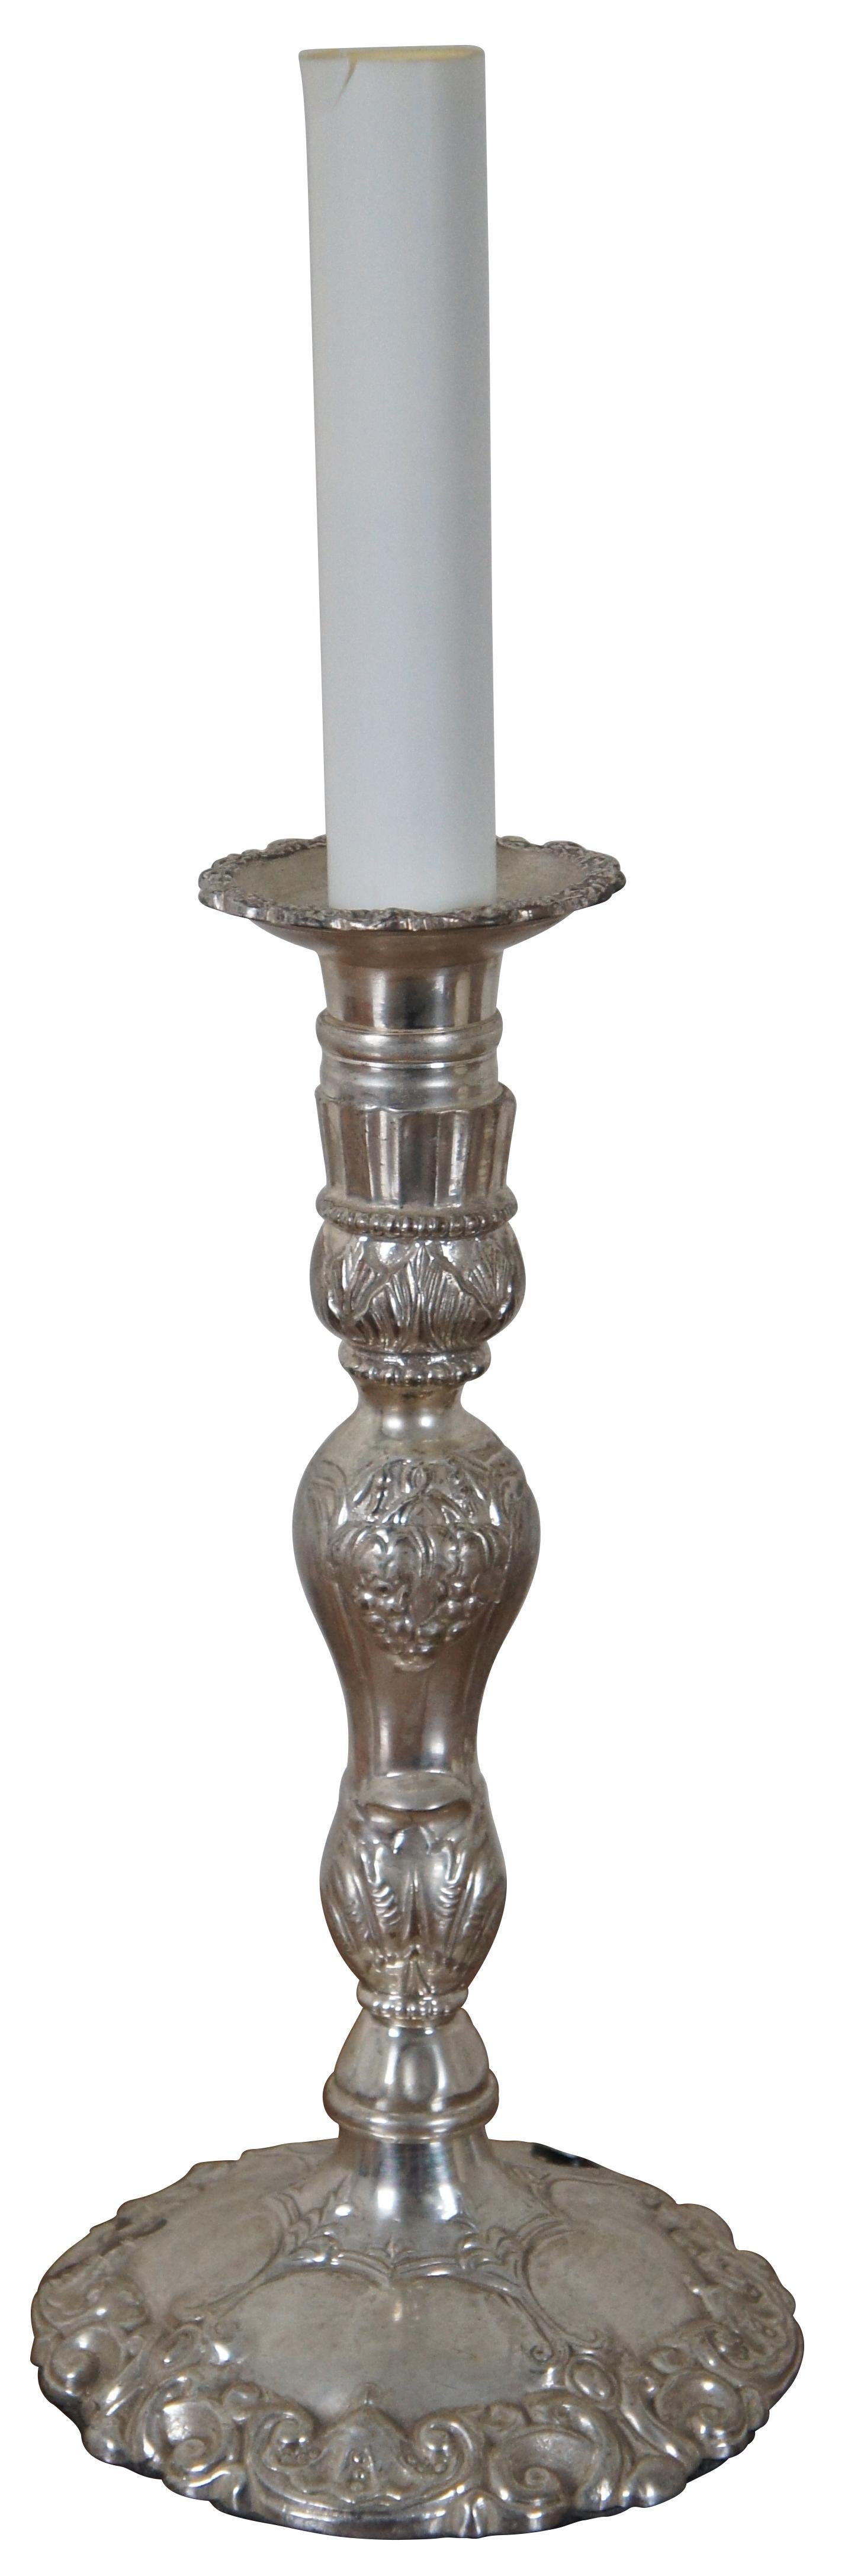 Antique Neoclassical Silver Plate Converted Candlestick Buffet Table Lamp Light In Good Condition For Sale In Dayton, OH